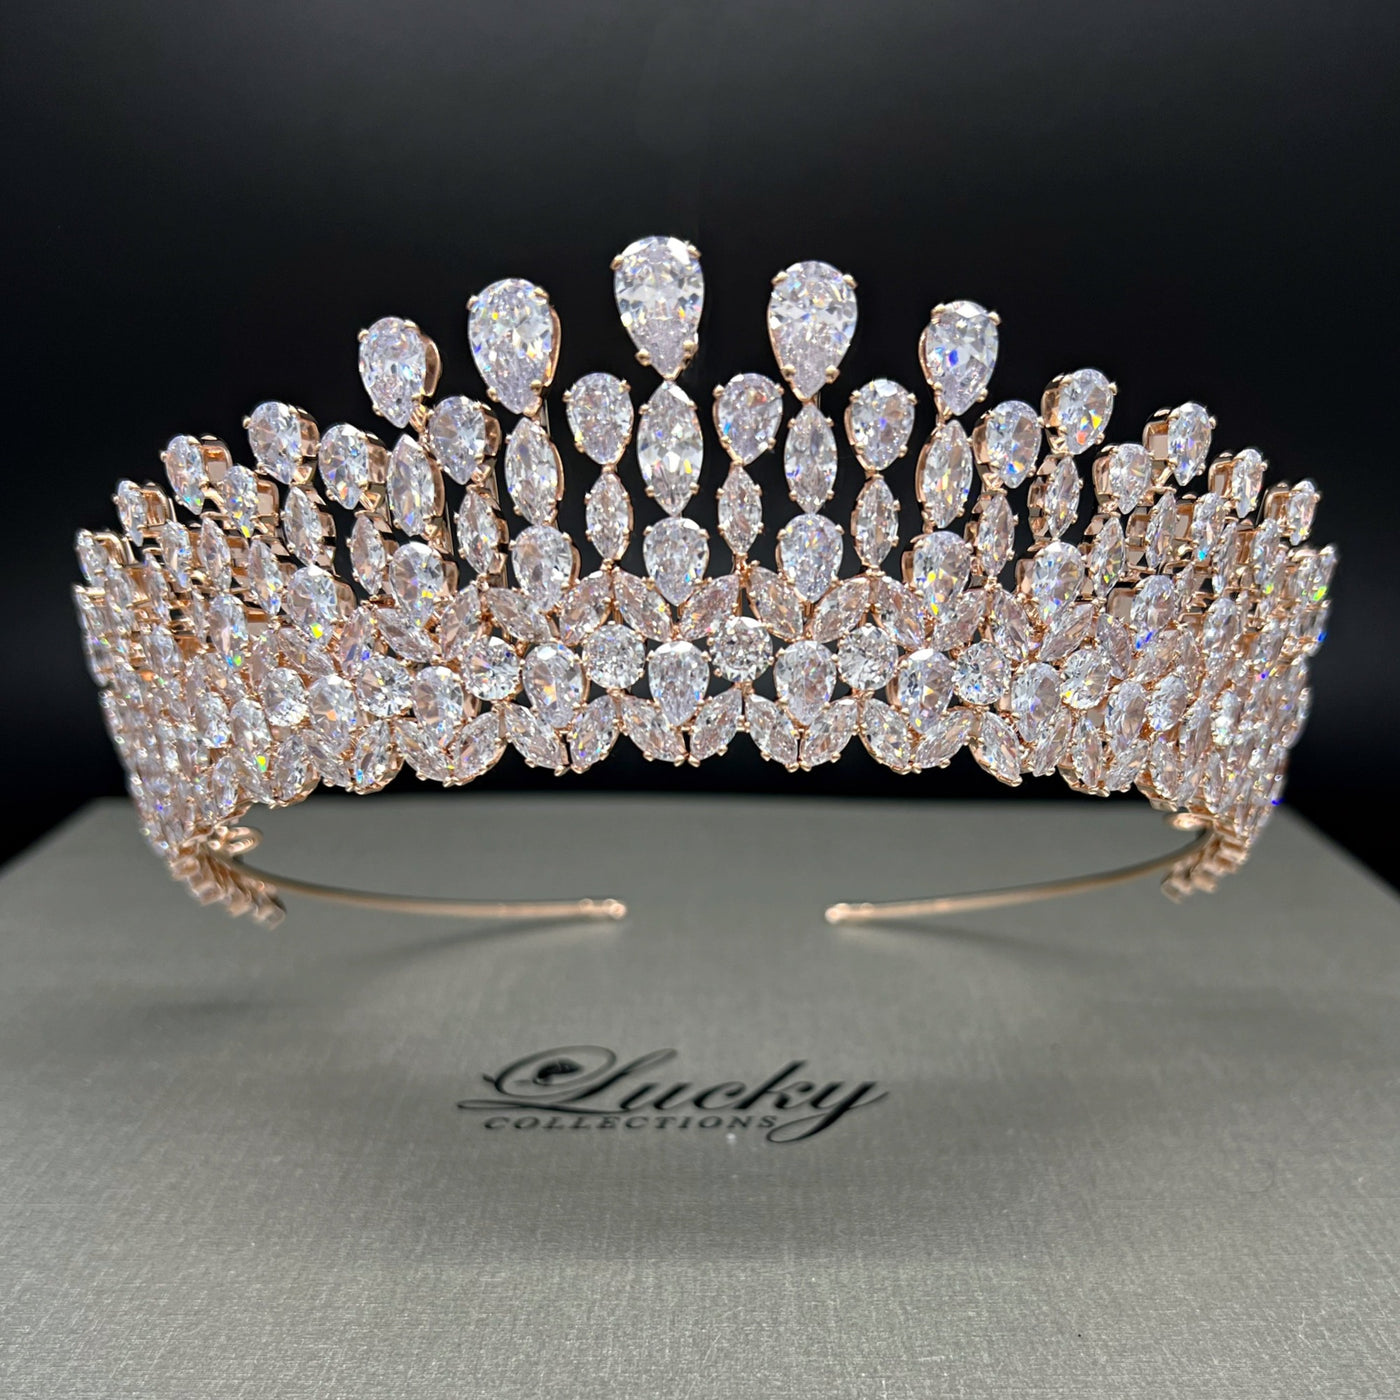 Rosegold crown, Tiara, Zirconia, Teardrop High Quality Cut by Lucky Collections ™